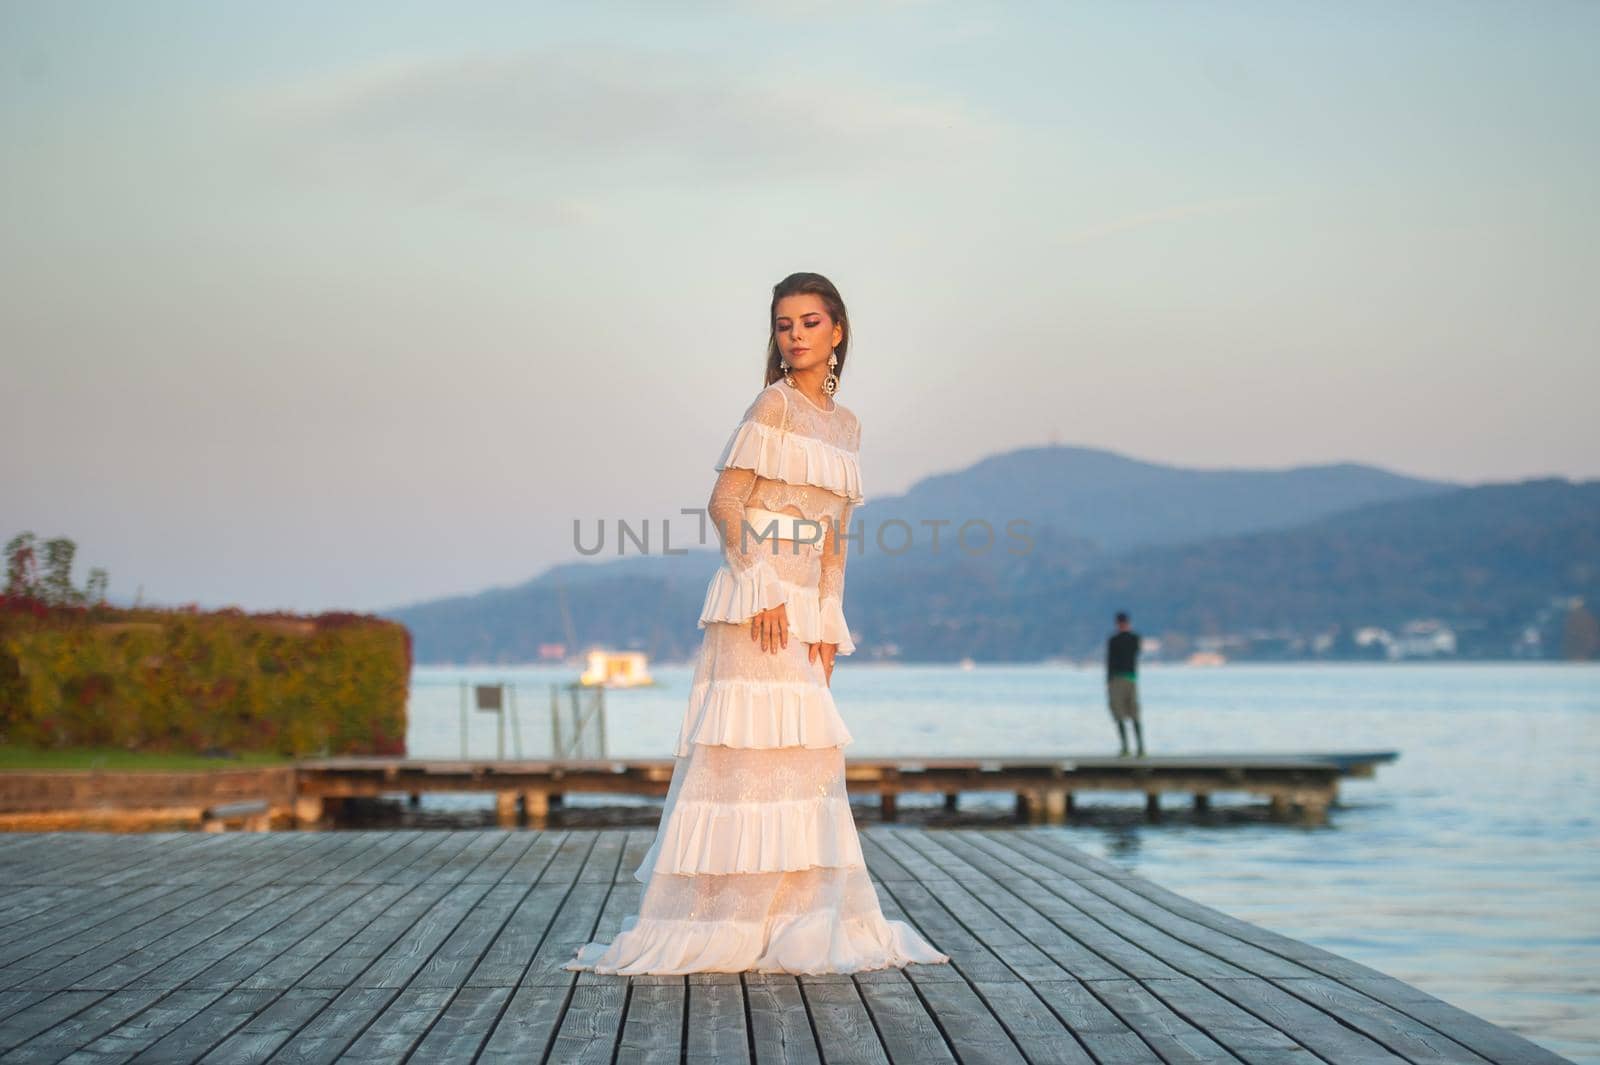 A bride in a white wedding dress in the old town of Austria at sunset by Lobachad